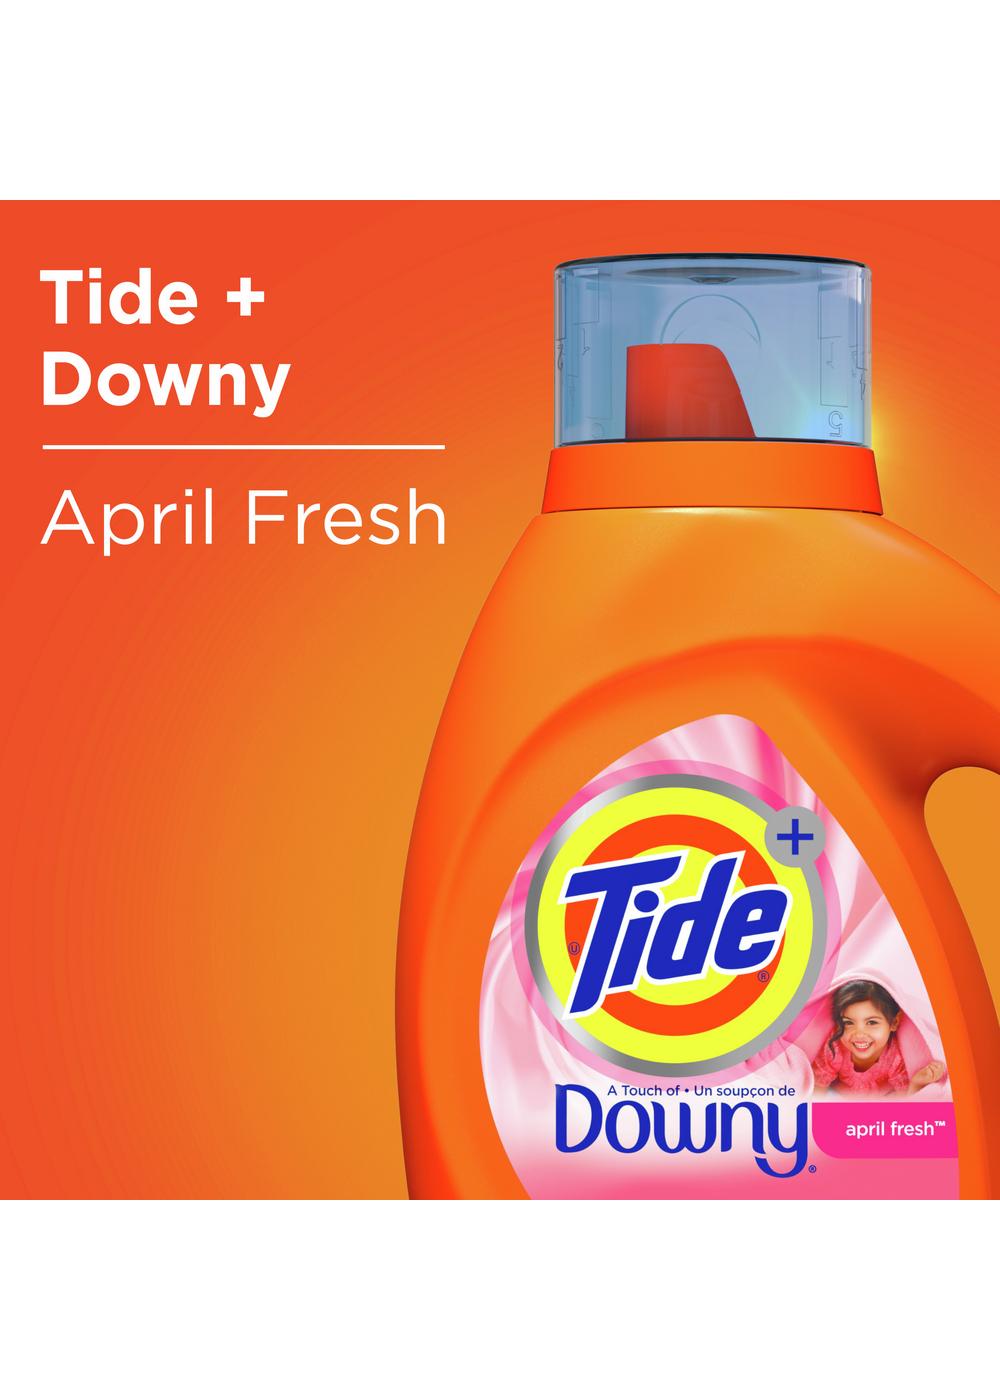 Tide + Downy HE Turbo Clean Liquid Laundry Detergent, 29 Loads - April Fresh; image 12 of 12